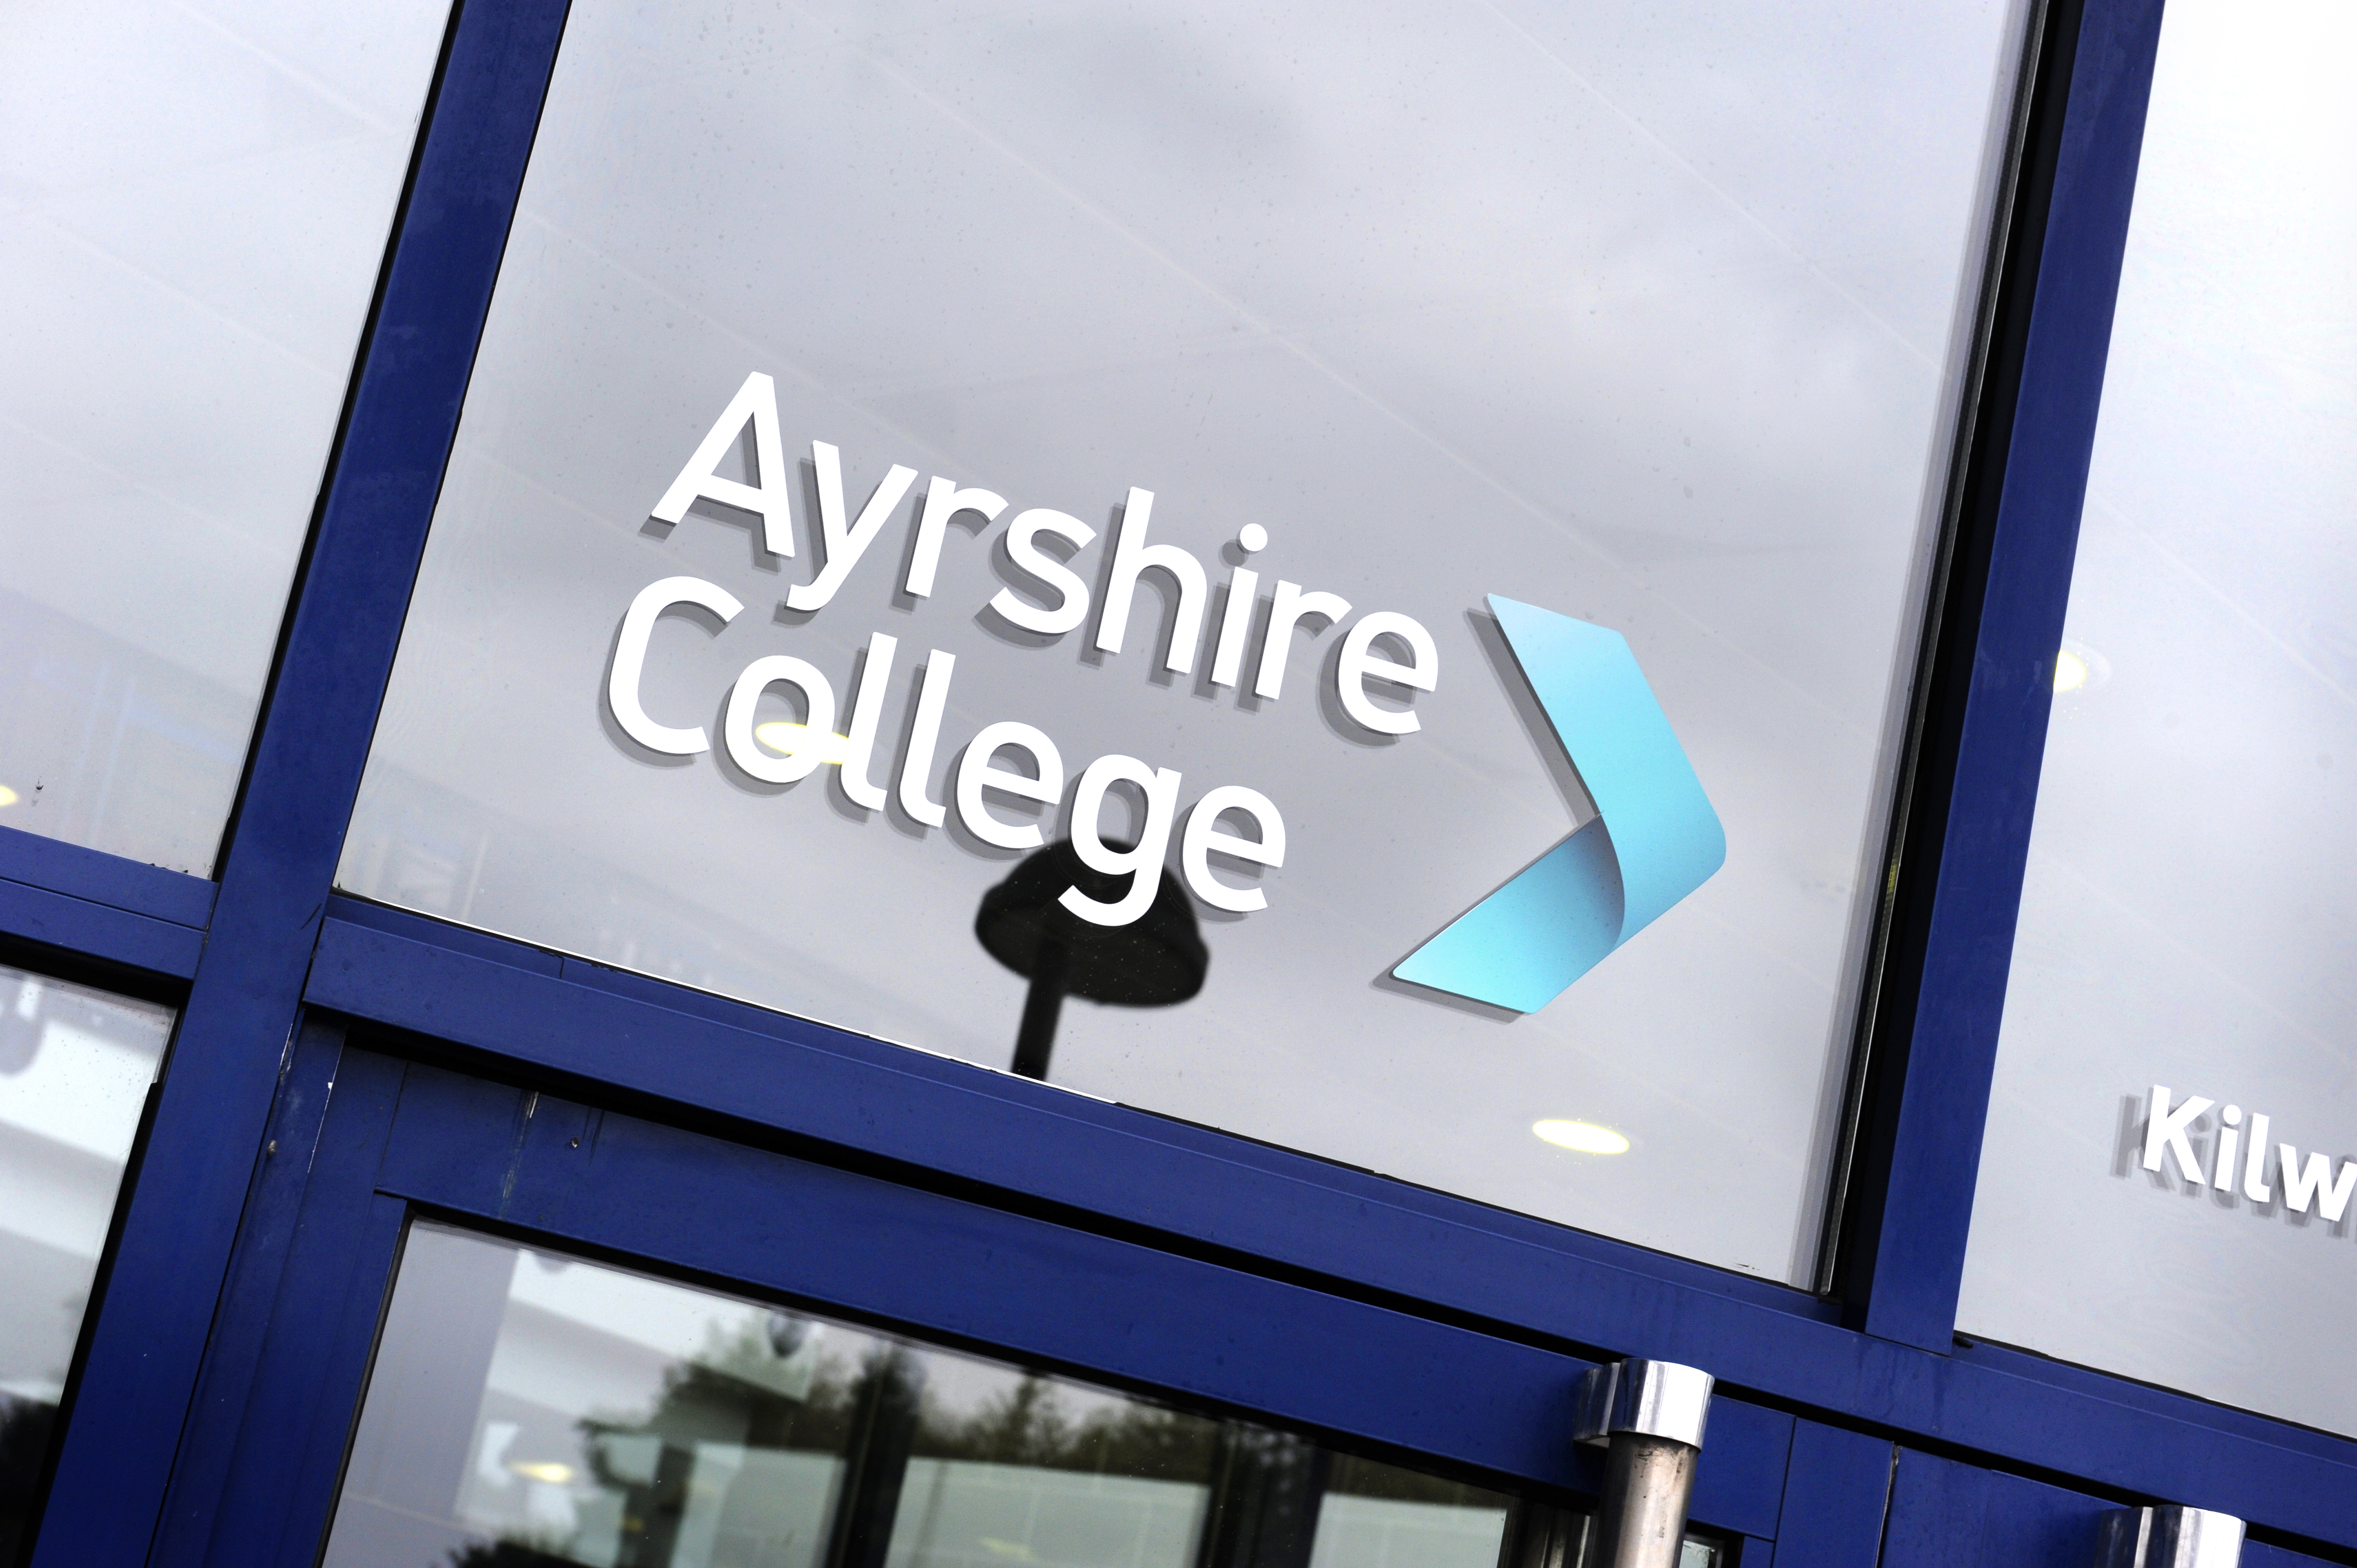 Ayrshire College is Creating Connections this month